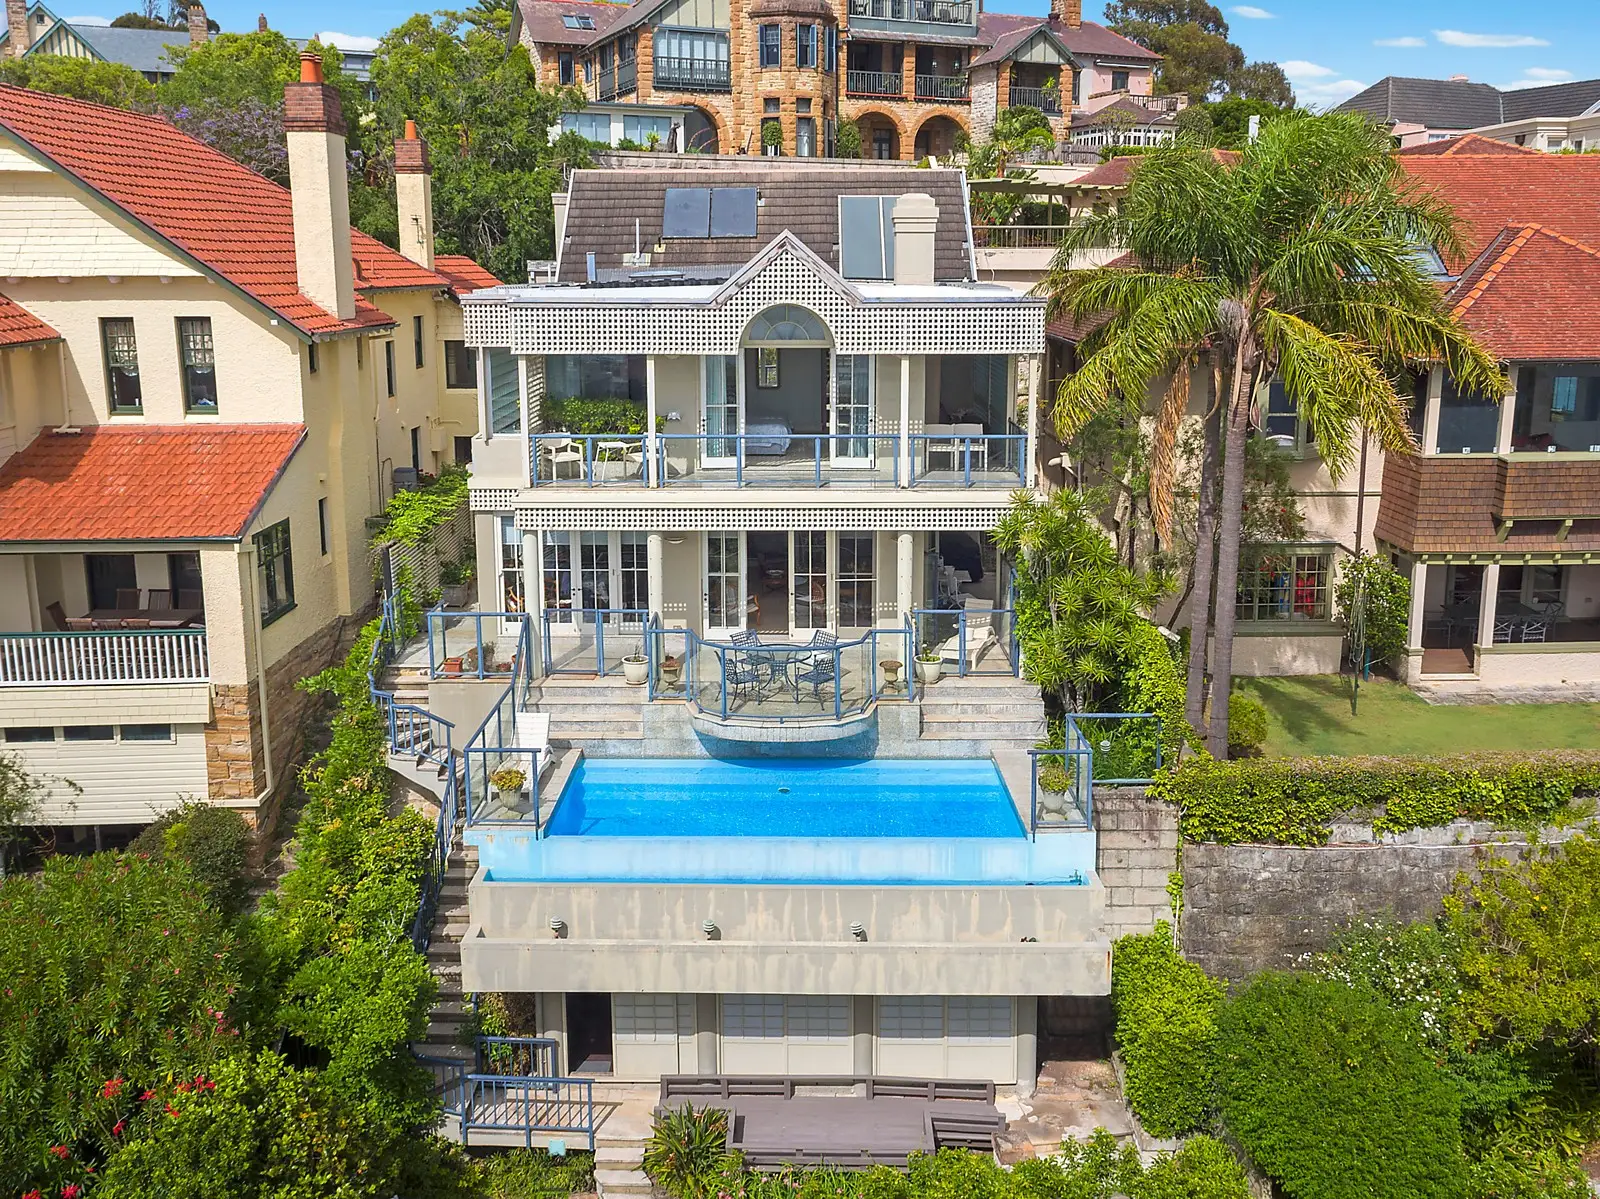 Photo #1: 14 Wentworth Place, Point Piper - Sold by Sydney Sotheby's International Realty